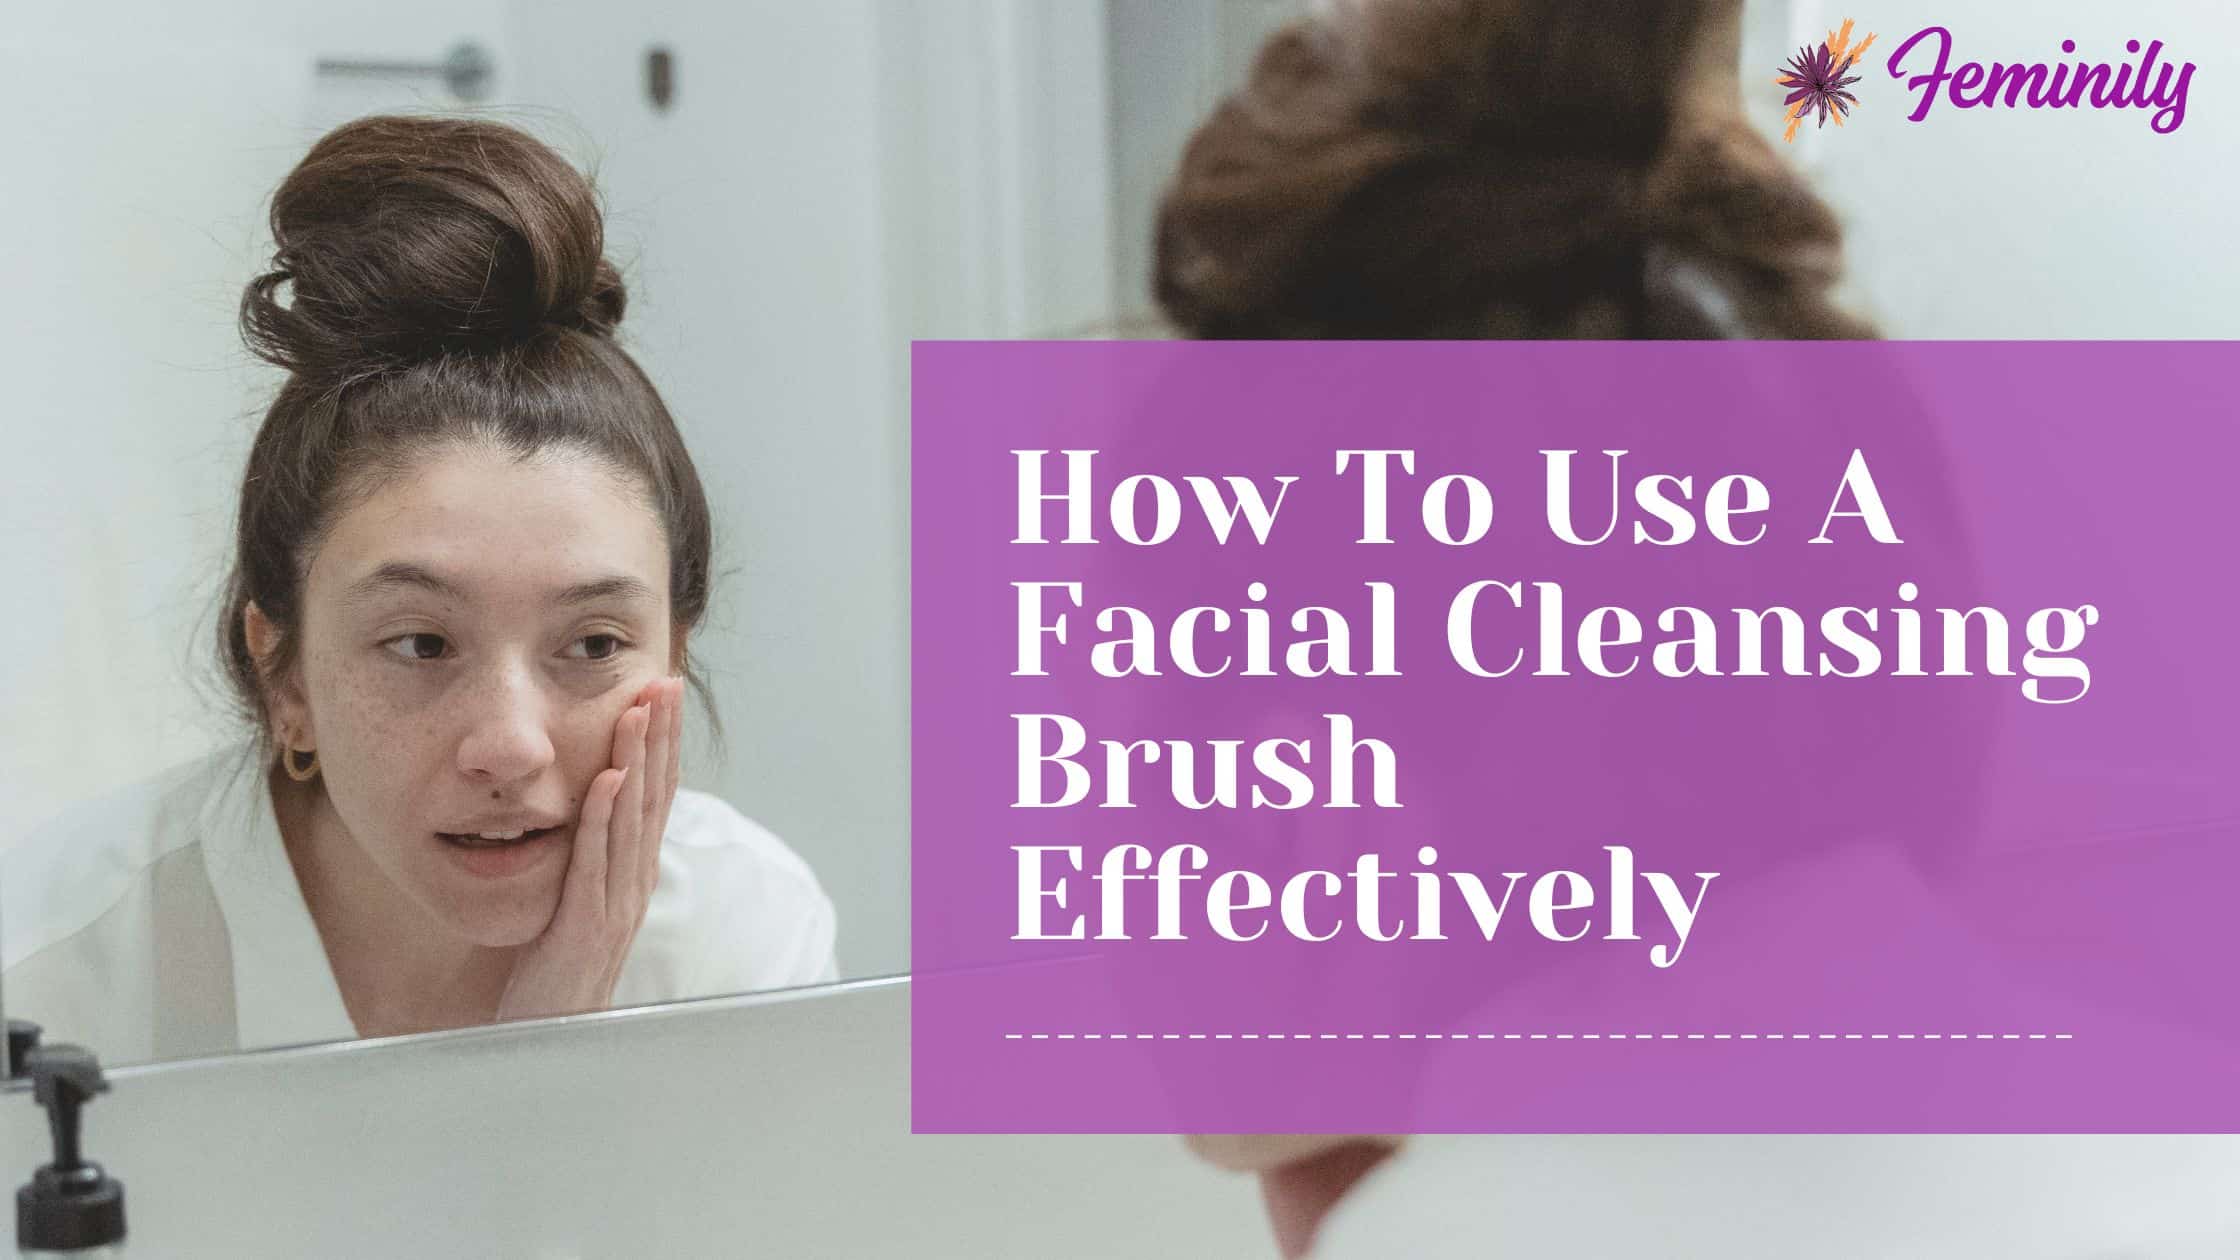 How to use facial cleansing brush effectively